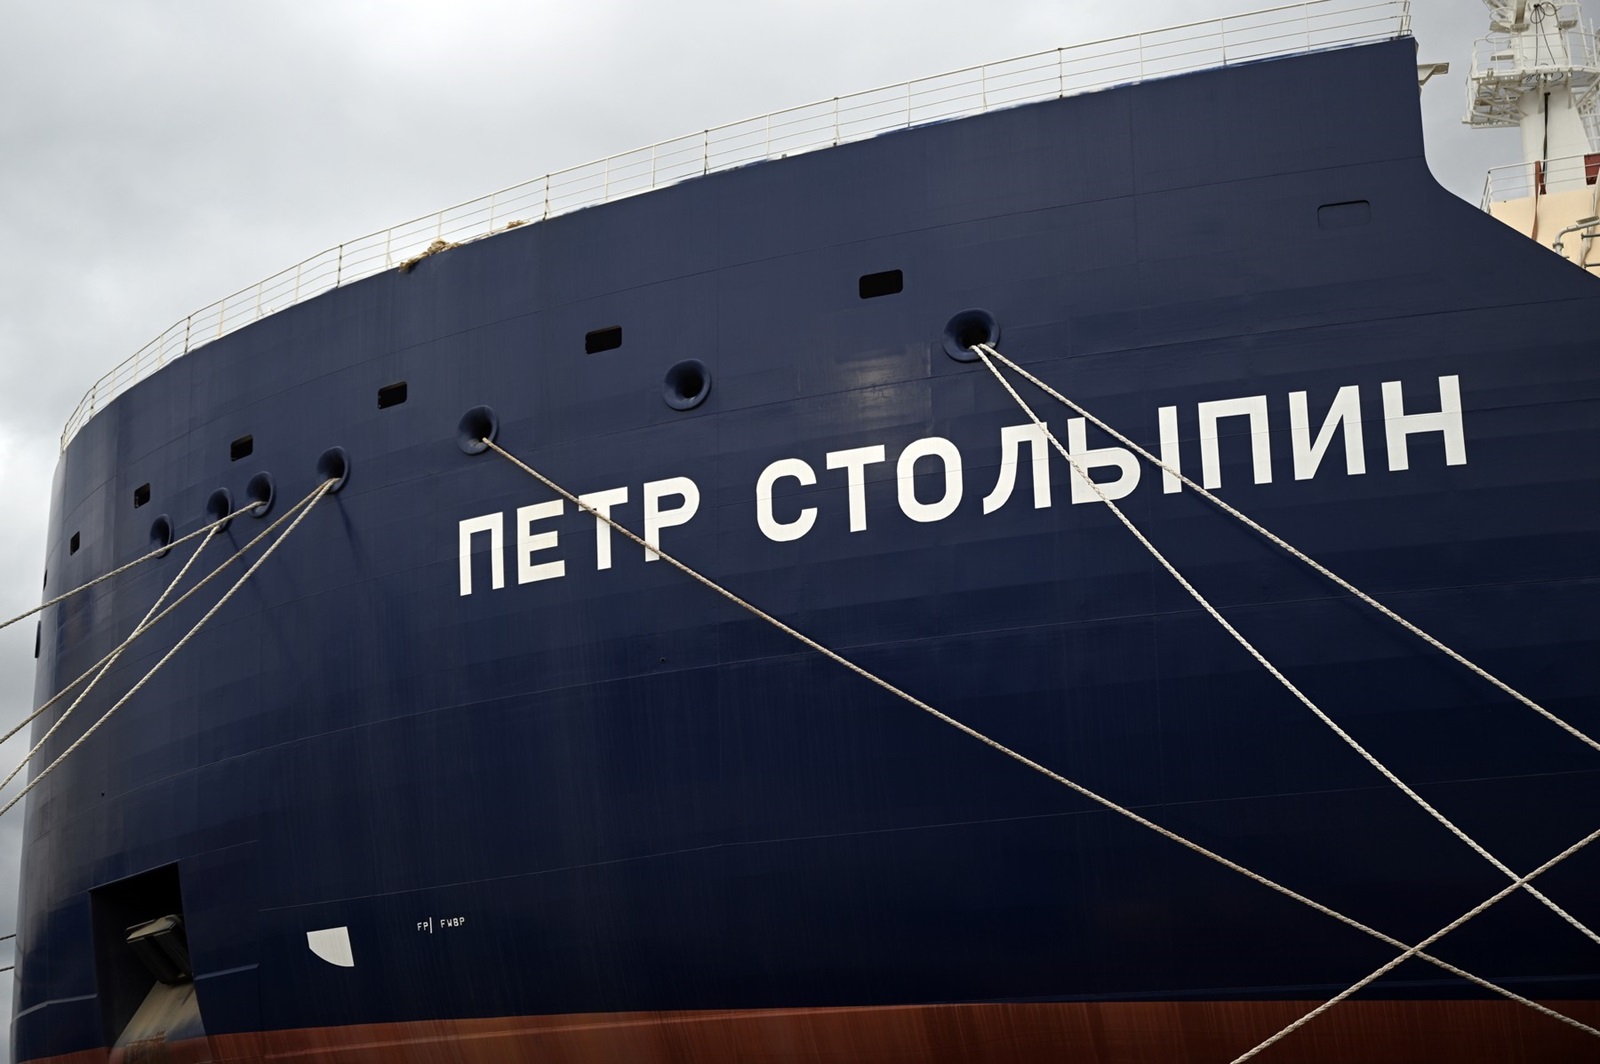 8514580 11.09.2023 Icebreaking LNG tanker Pyotr Stolypin is seen moored to the pier of the Zvezda shipbuilding complex in Primorsky Krai region, Russia.,Image: 804553102, License: Rights-managed, Restrictions: Editors' note: THIS IMAGE IS PROVIDED BY RUSSIAN STATE-OWNED AGENCY SPUTNIK., Model Release: no, Credit line: Pavel Bednyakov / Sputnik / Profimedia